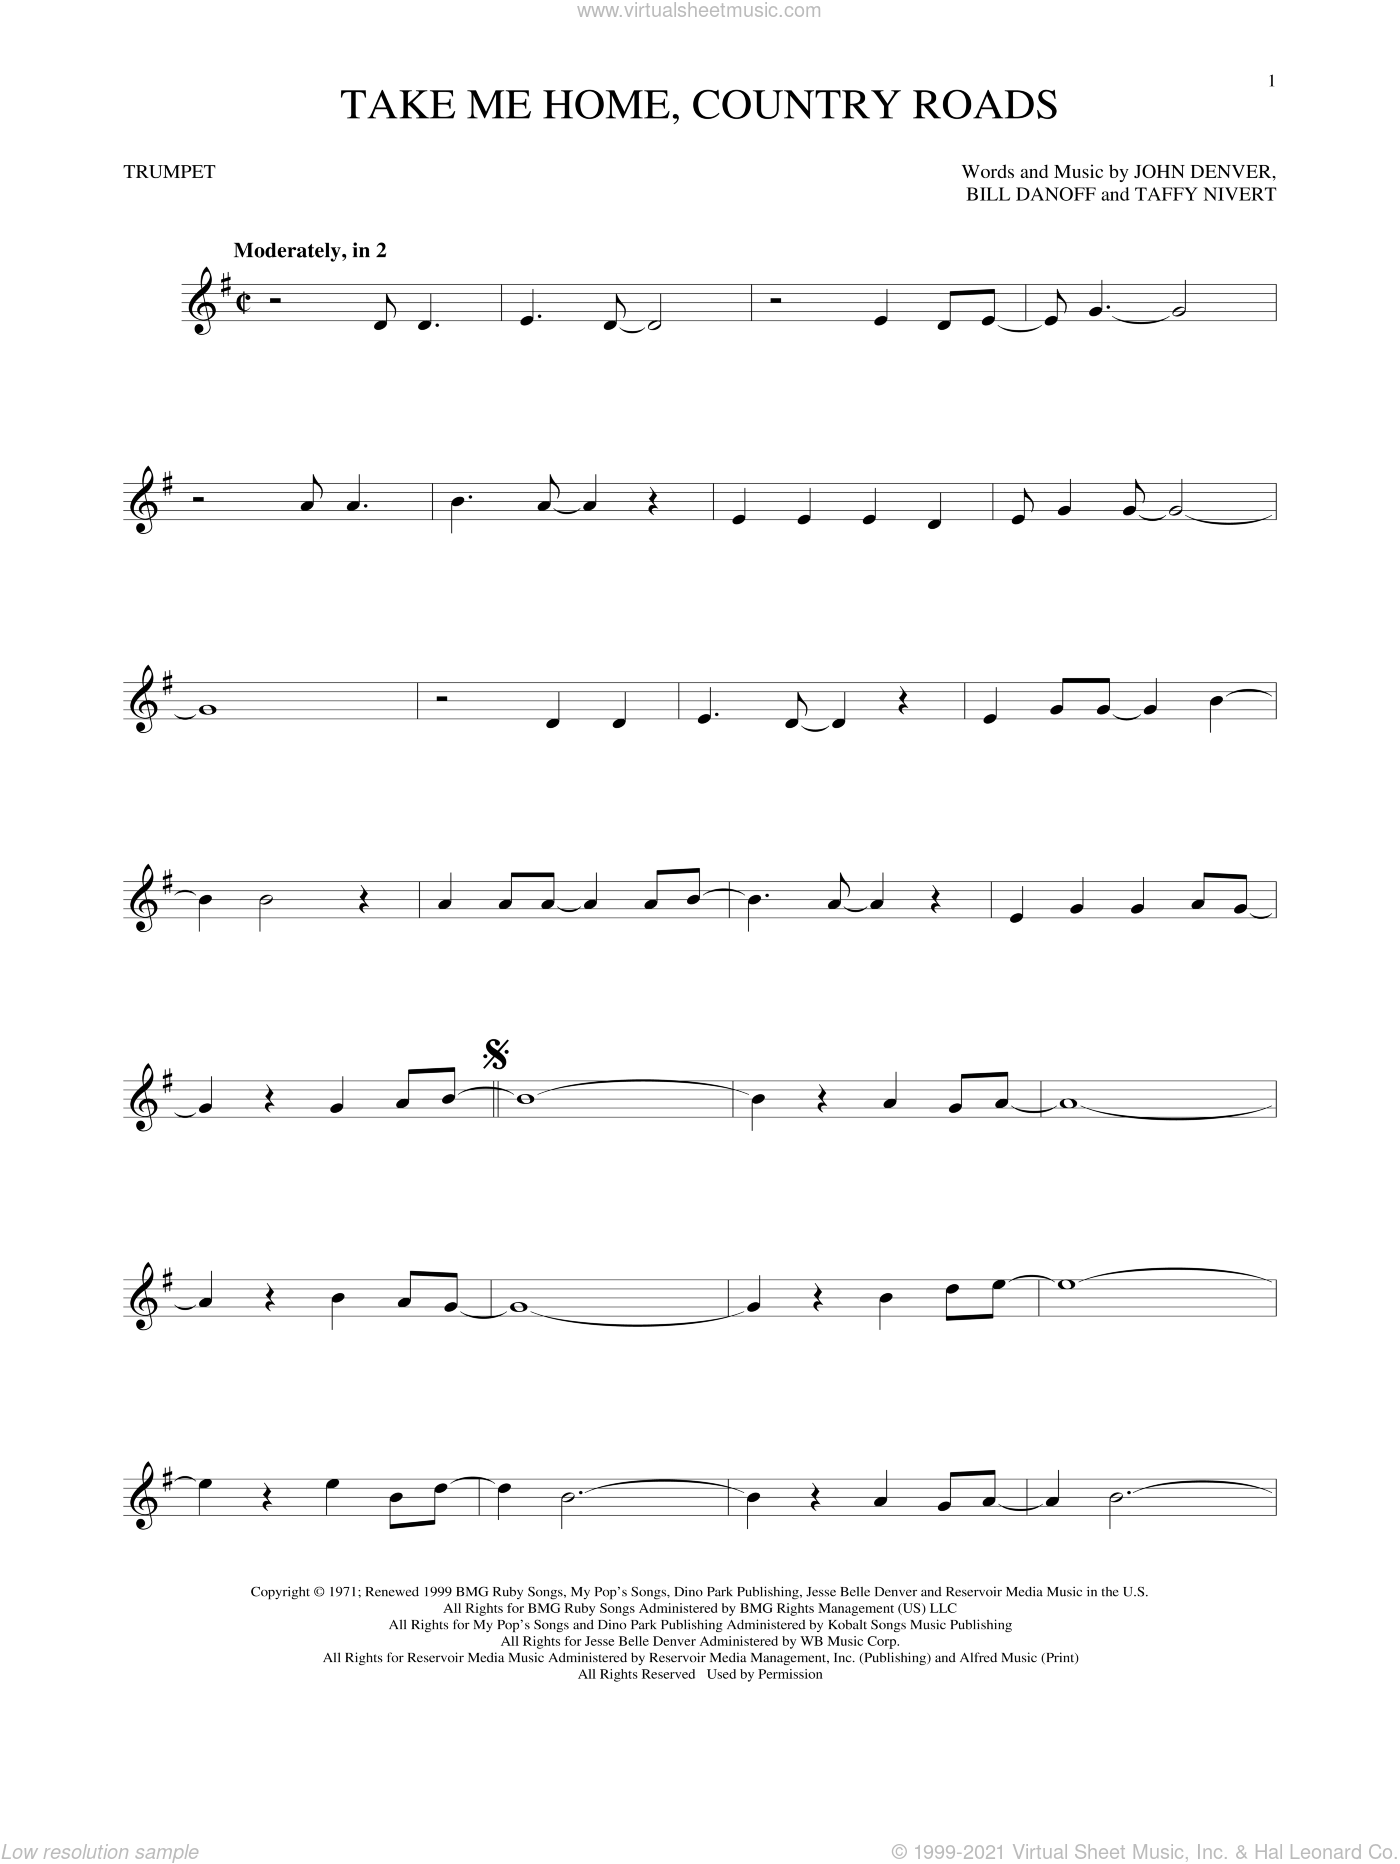 Free sheet music preview of Take Me Home, Country Roads for trumpet solo by...